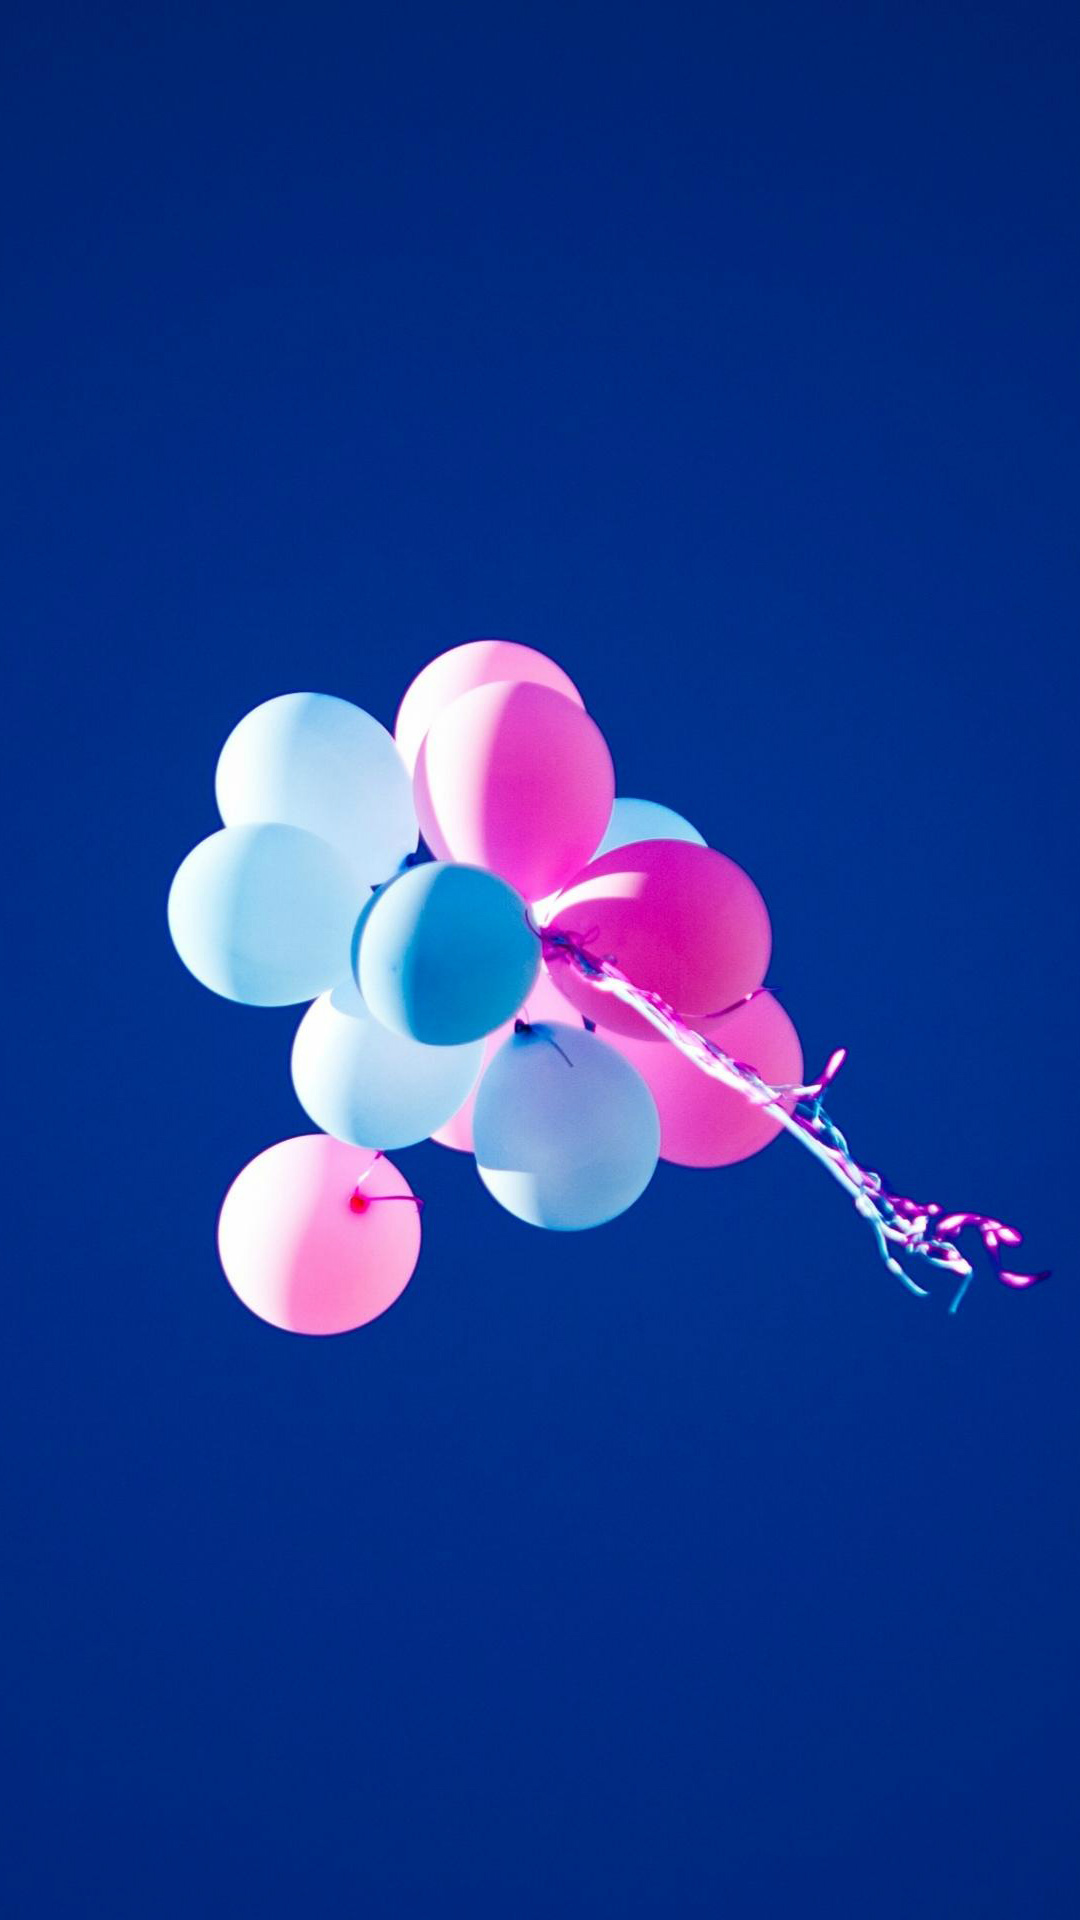 Flying Balloons In Blue Sky Iphone 6 Wallpaper Download Iphone